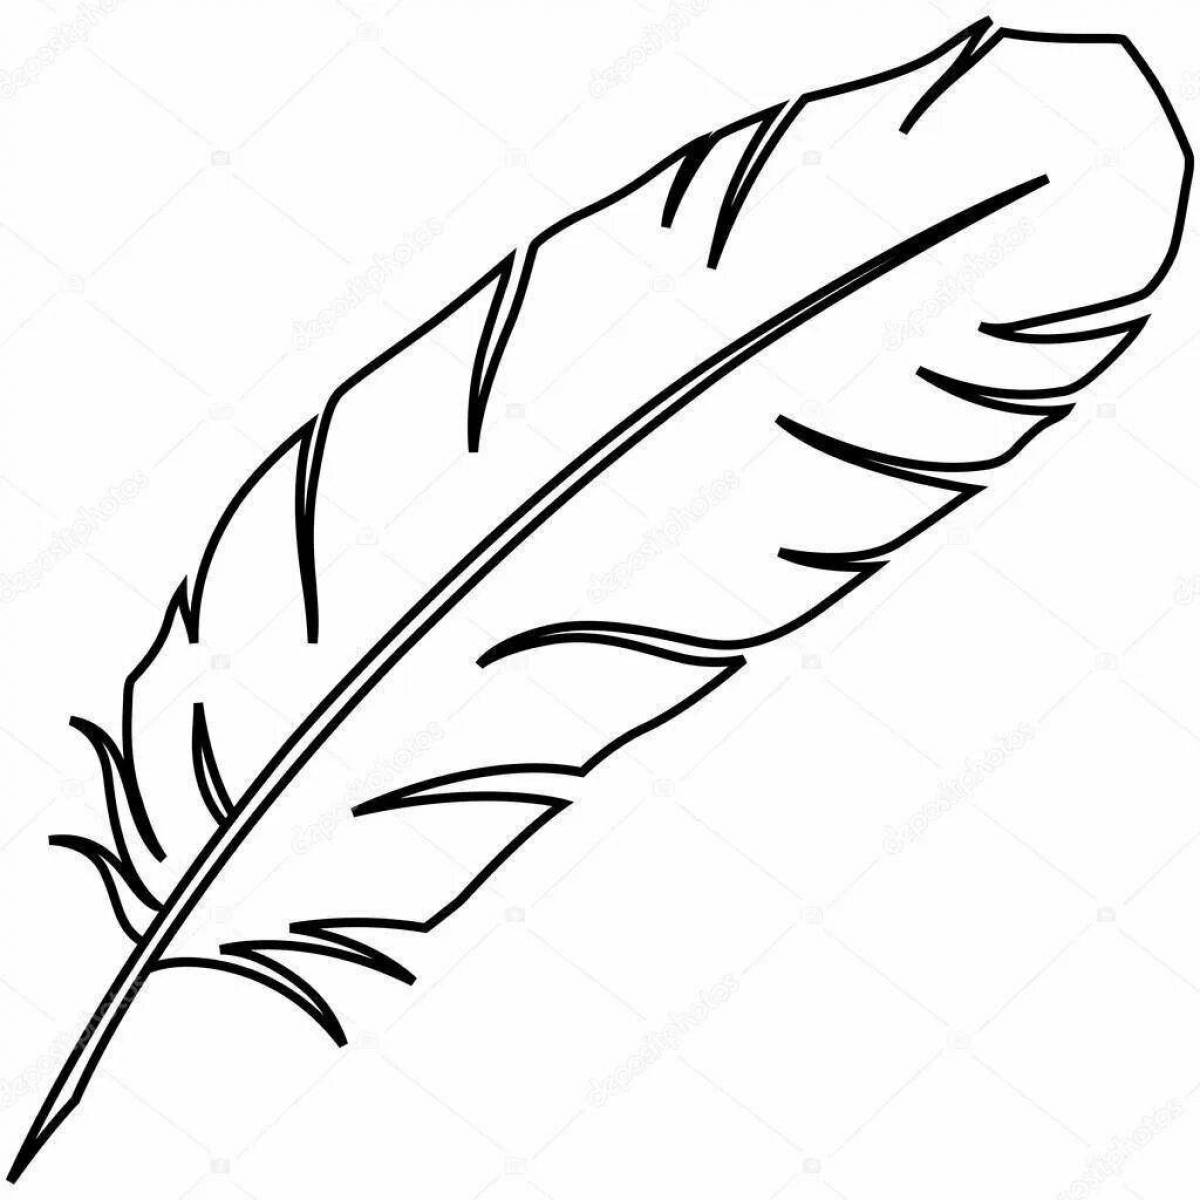 Coloring page funny pattern with feathers